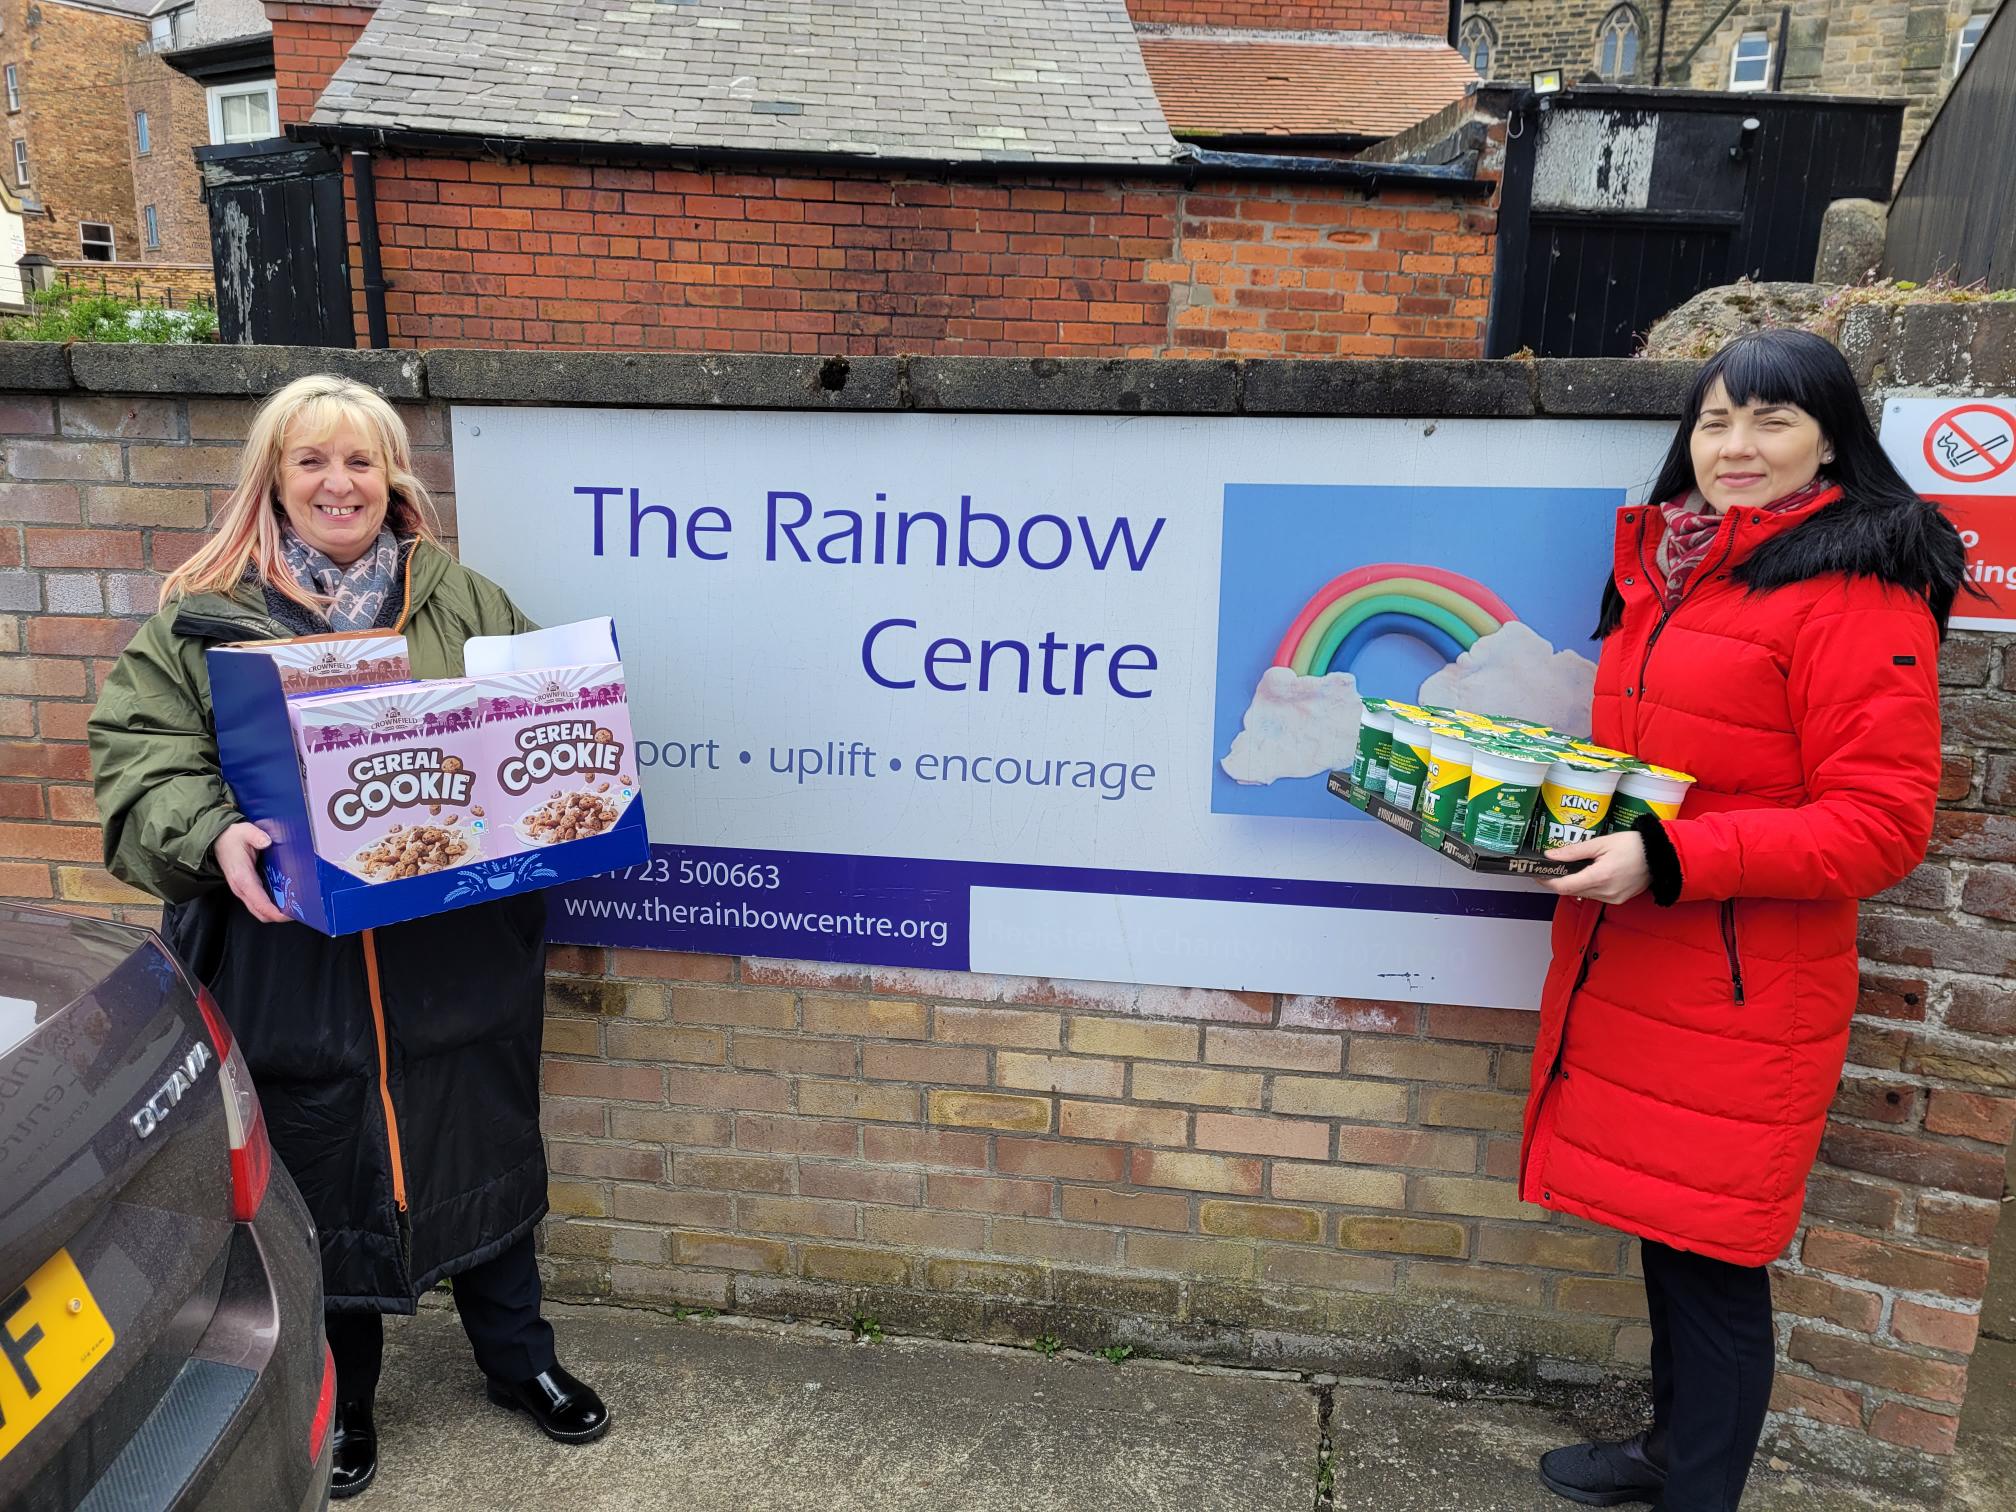 Trina and Roxana dropping off their donation to the Rainbow Centre